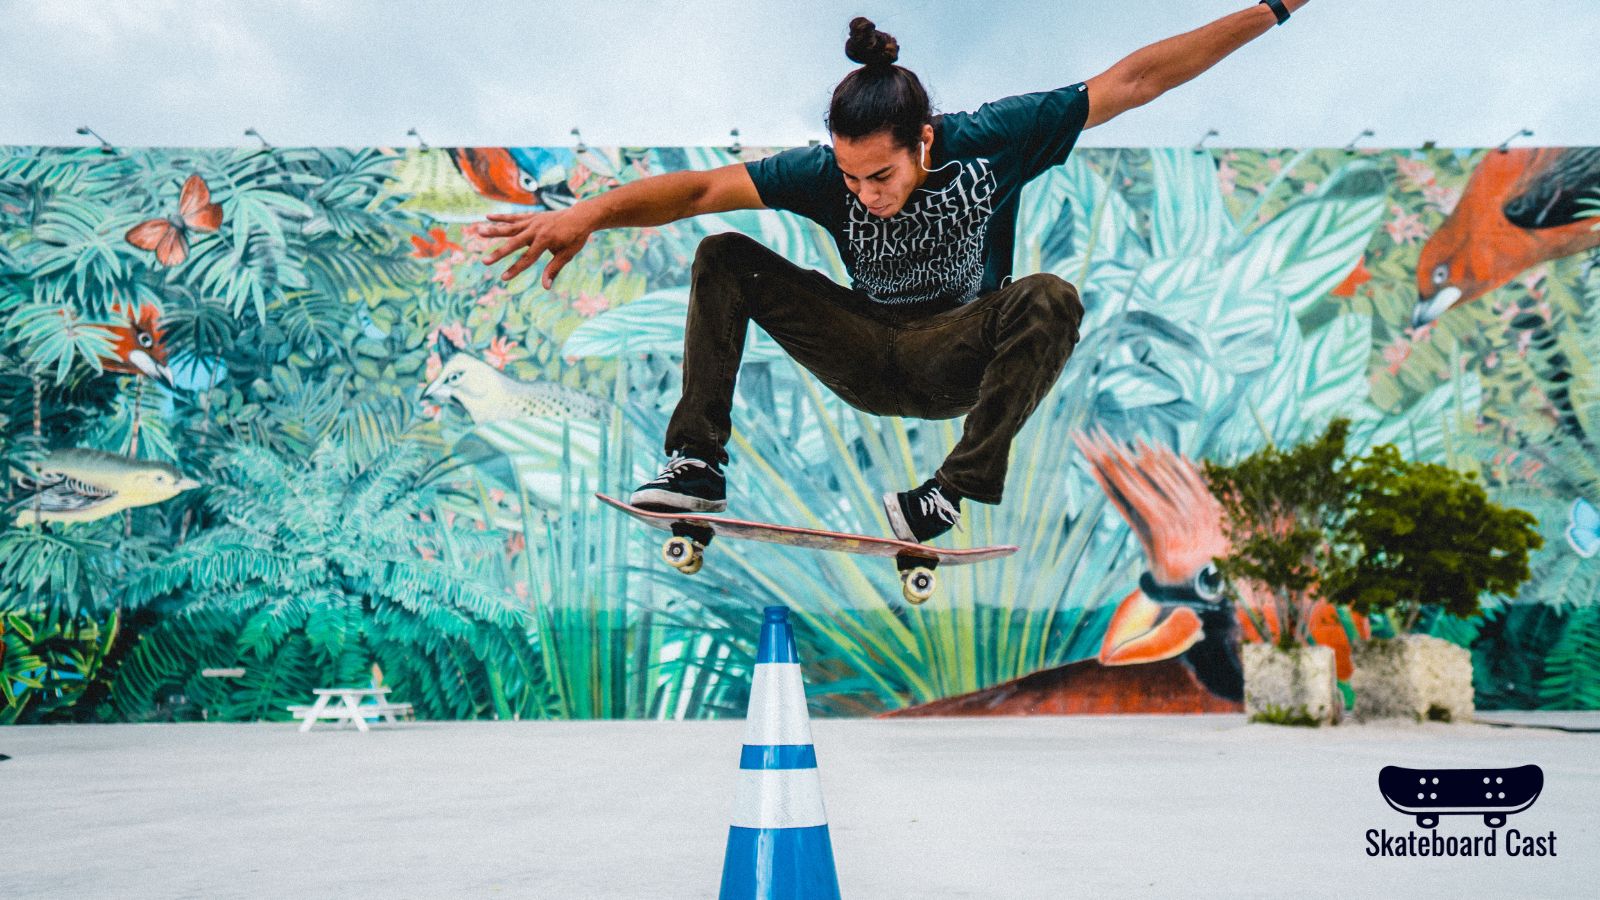 A skateboarder performing a trick in front of a mural.